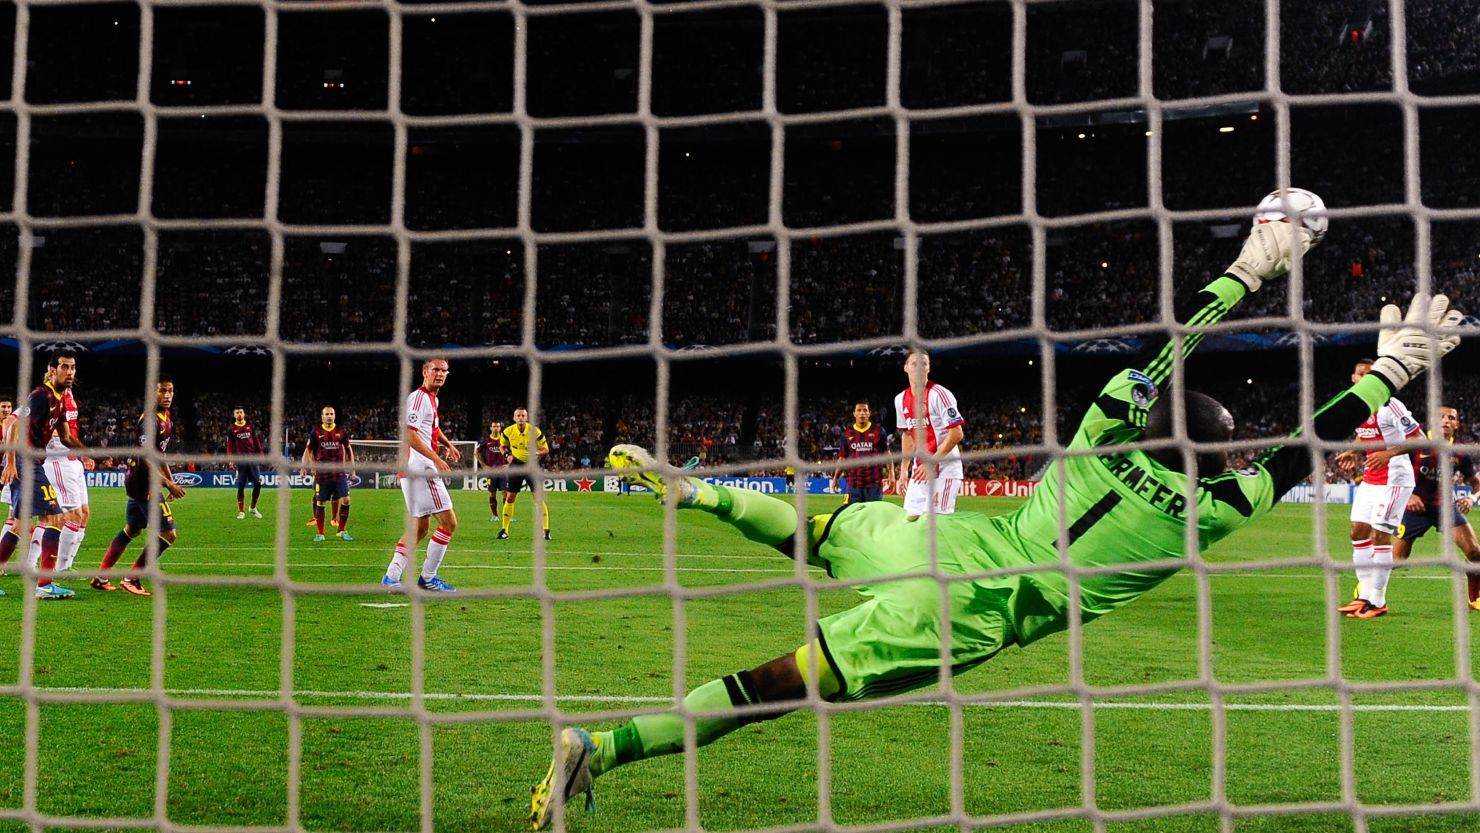 Barcelona beat Ajax 4-0 thanks in part to Lionel Messi's stunning free kick but Chelsea and Borussia Dortmund lost. 